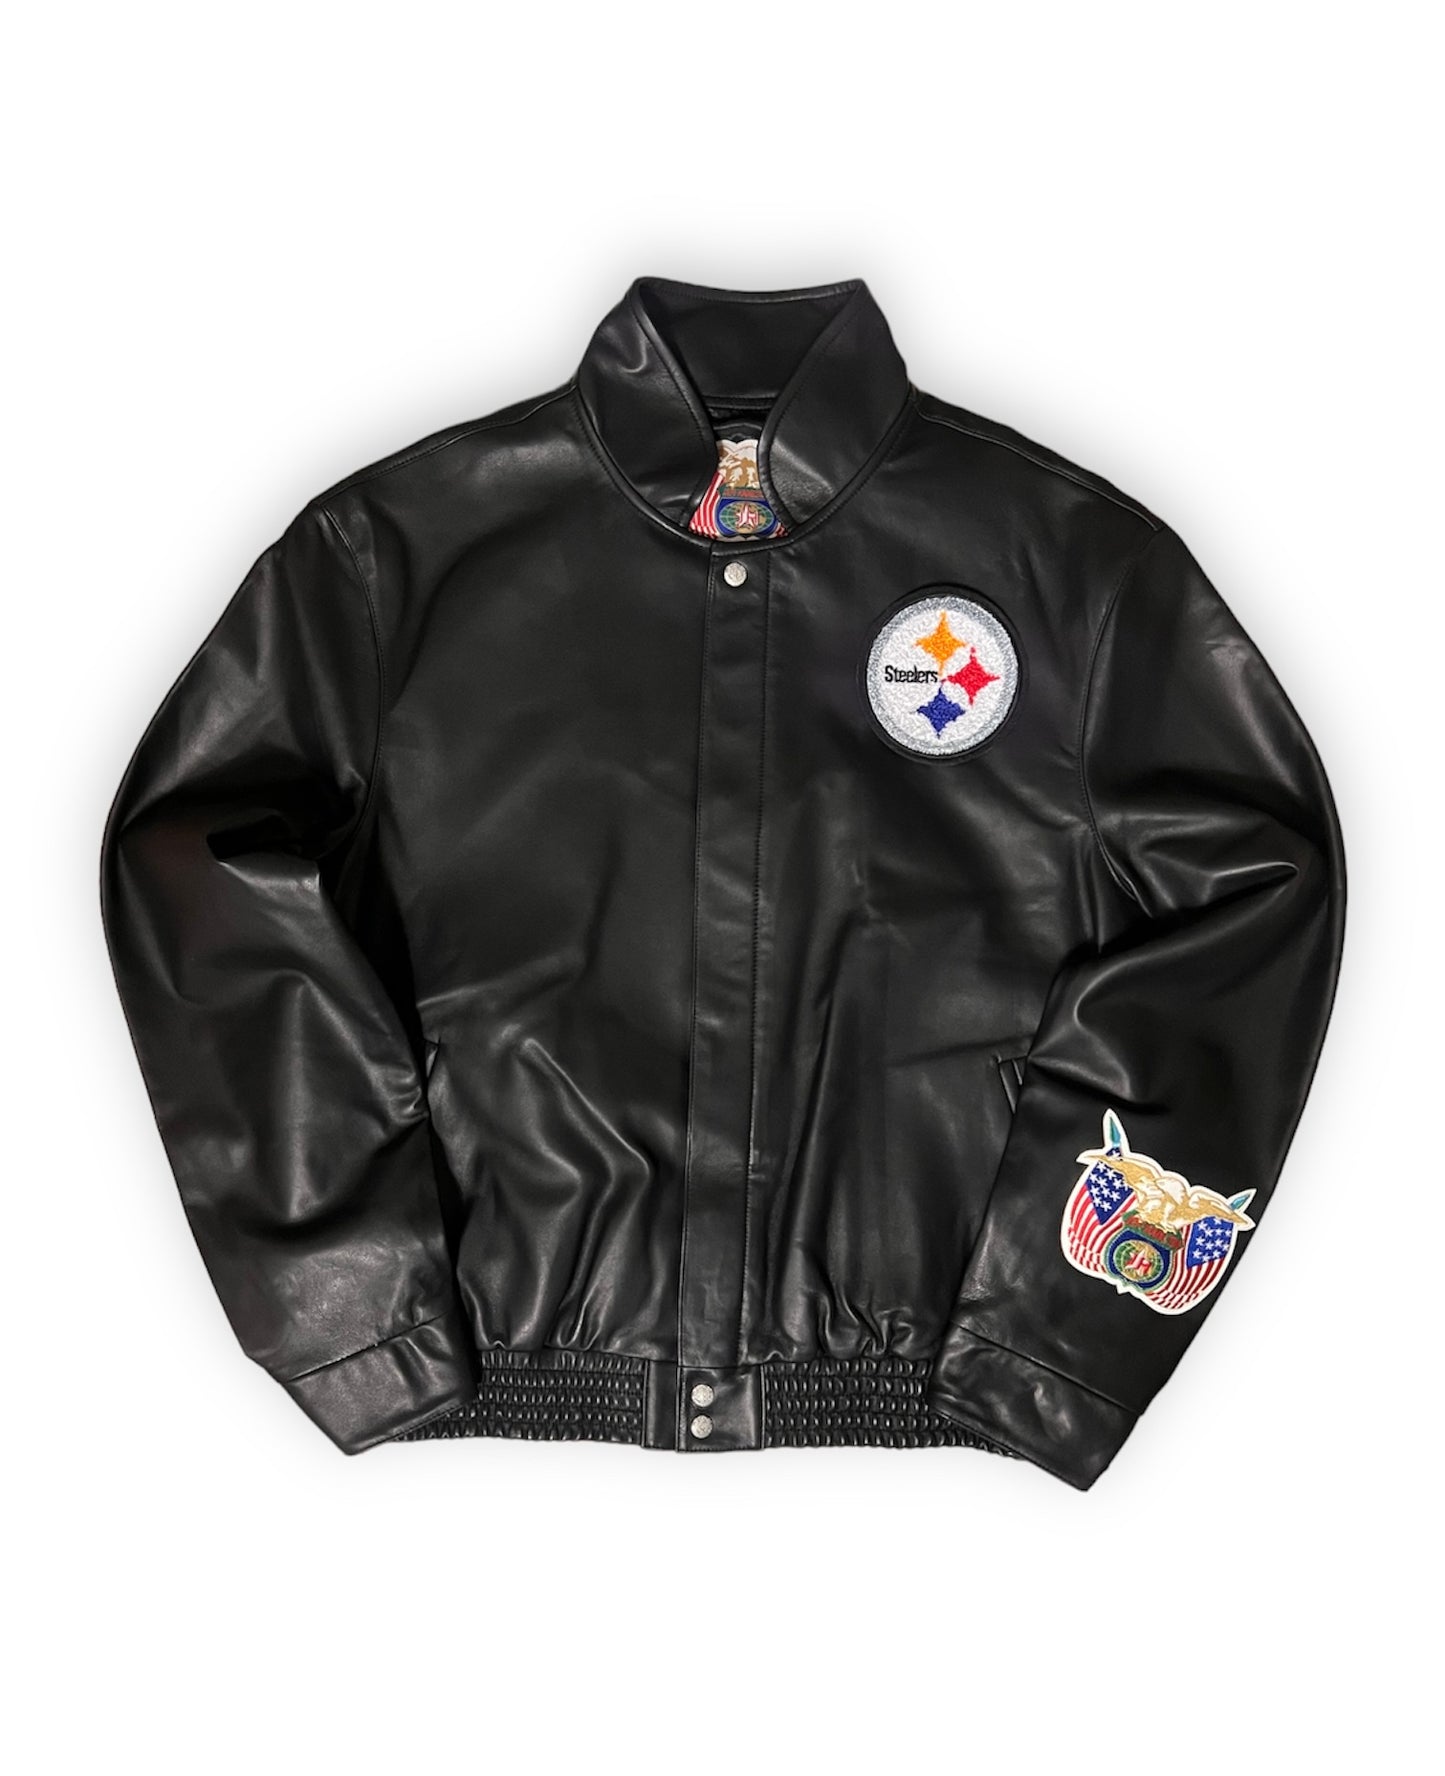 Steelers Men's Jeff Hamilton Full Leather Jacket w/ Patches - L